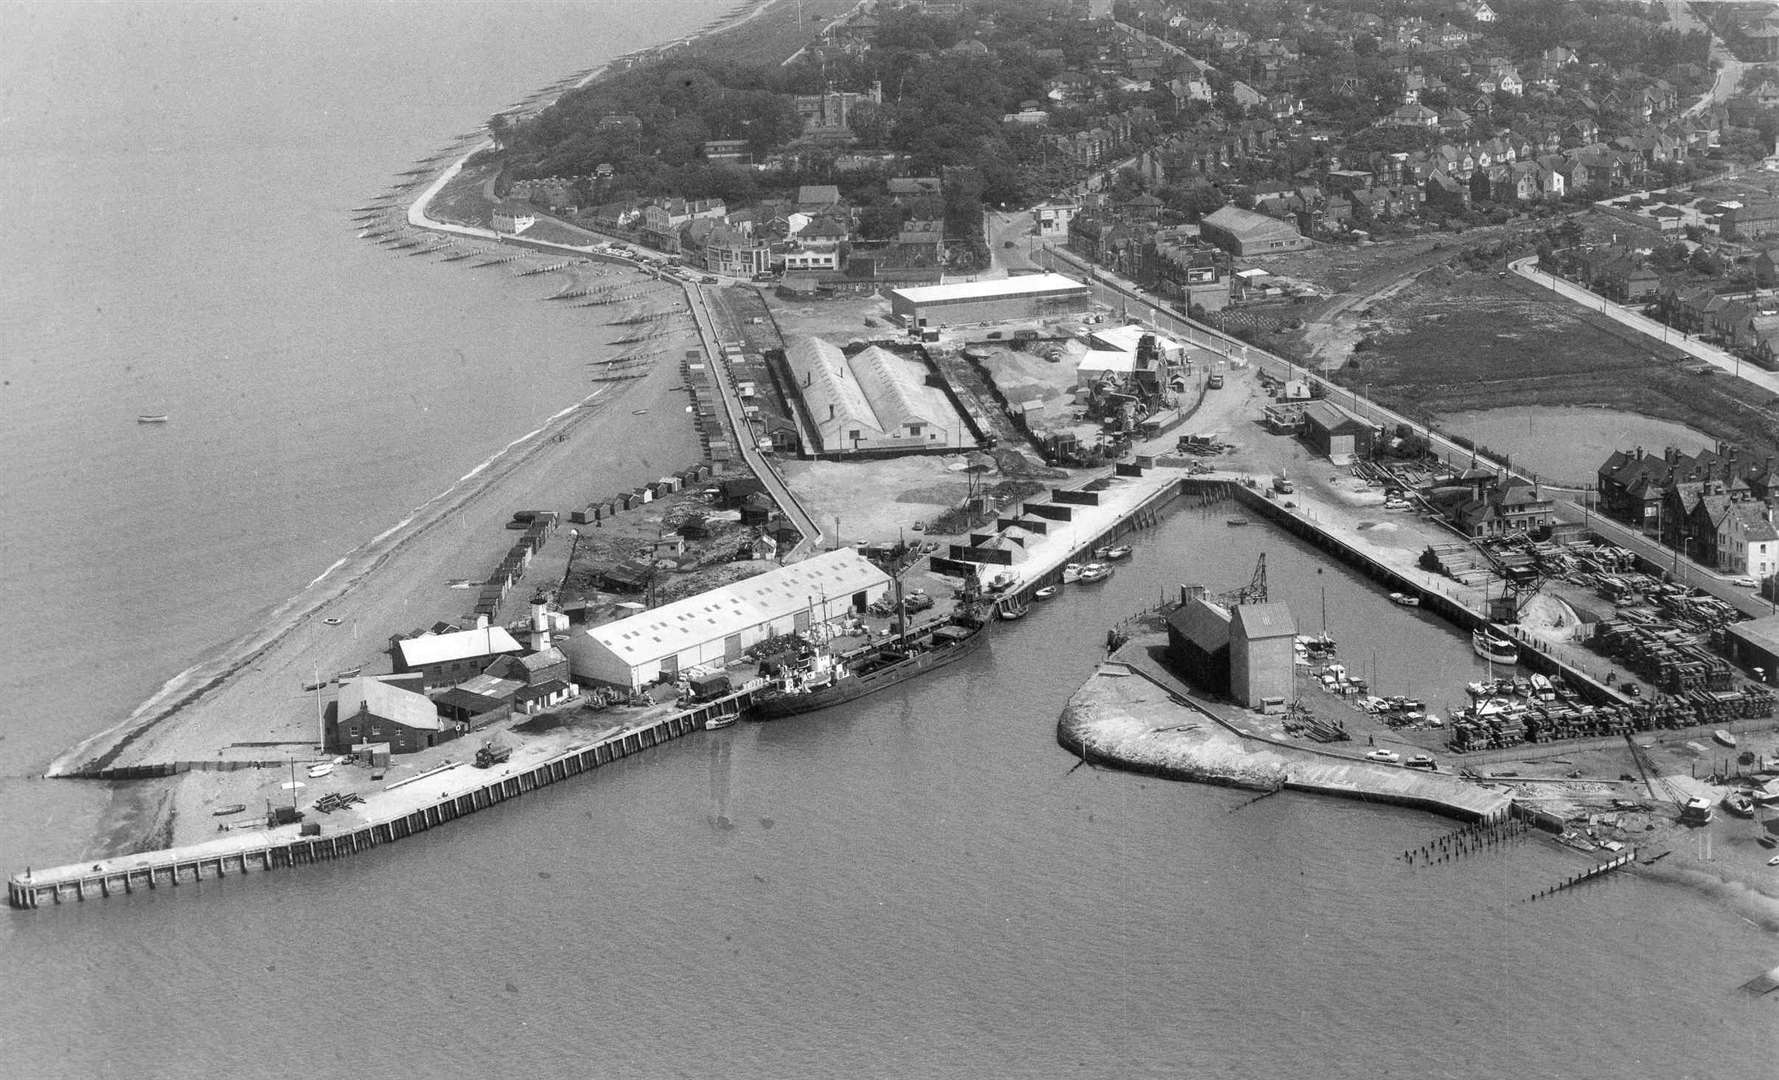 Whitstable Harbour from the skies 58 years ago. Picture: Skyfotos